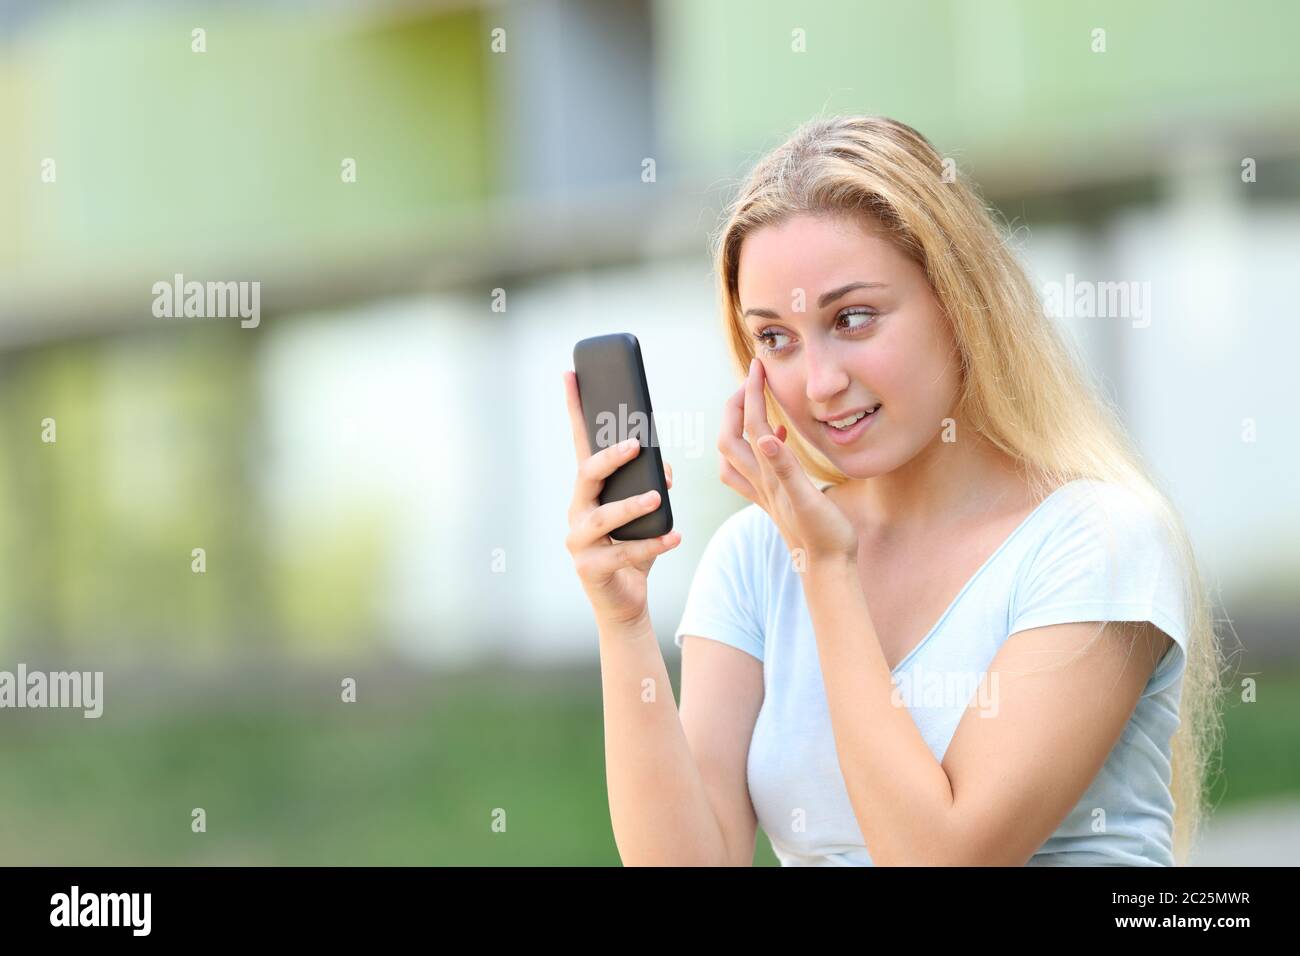 Teenage girl using smart phone as a mirror outdoors in an university campus Stock Photo